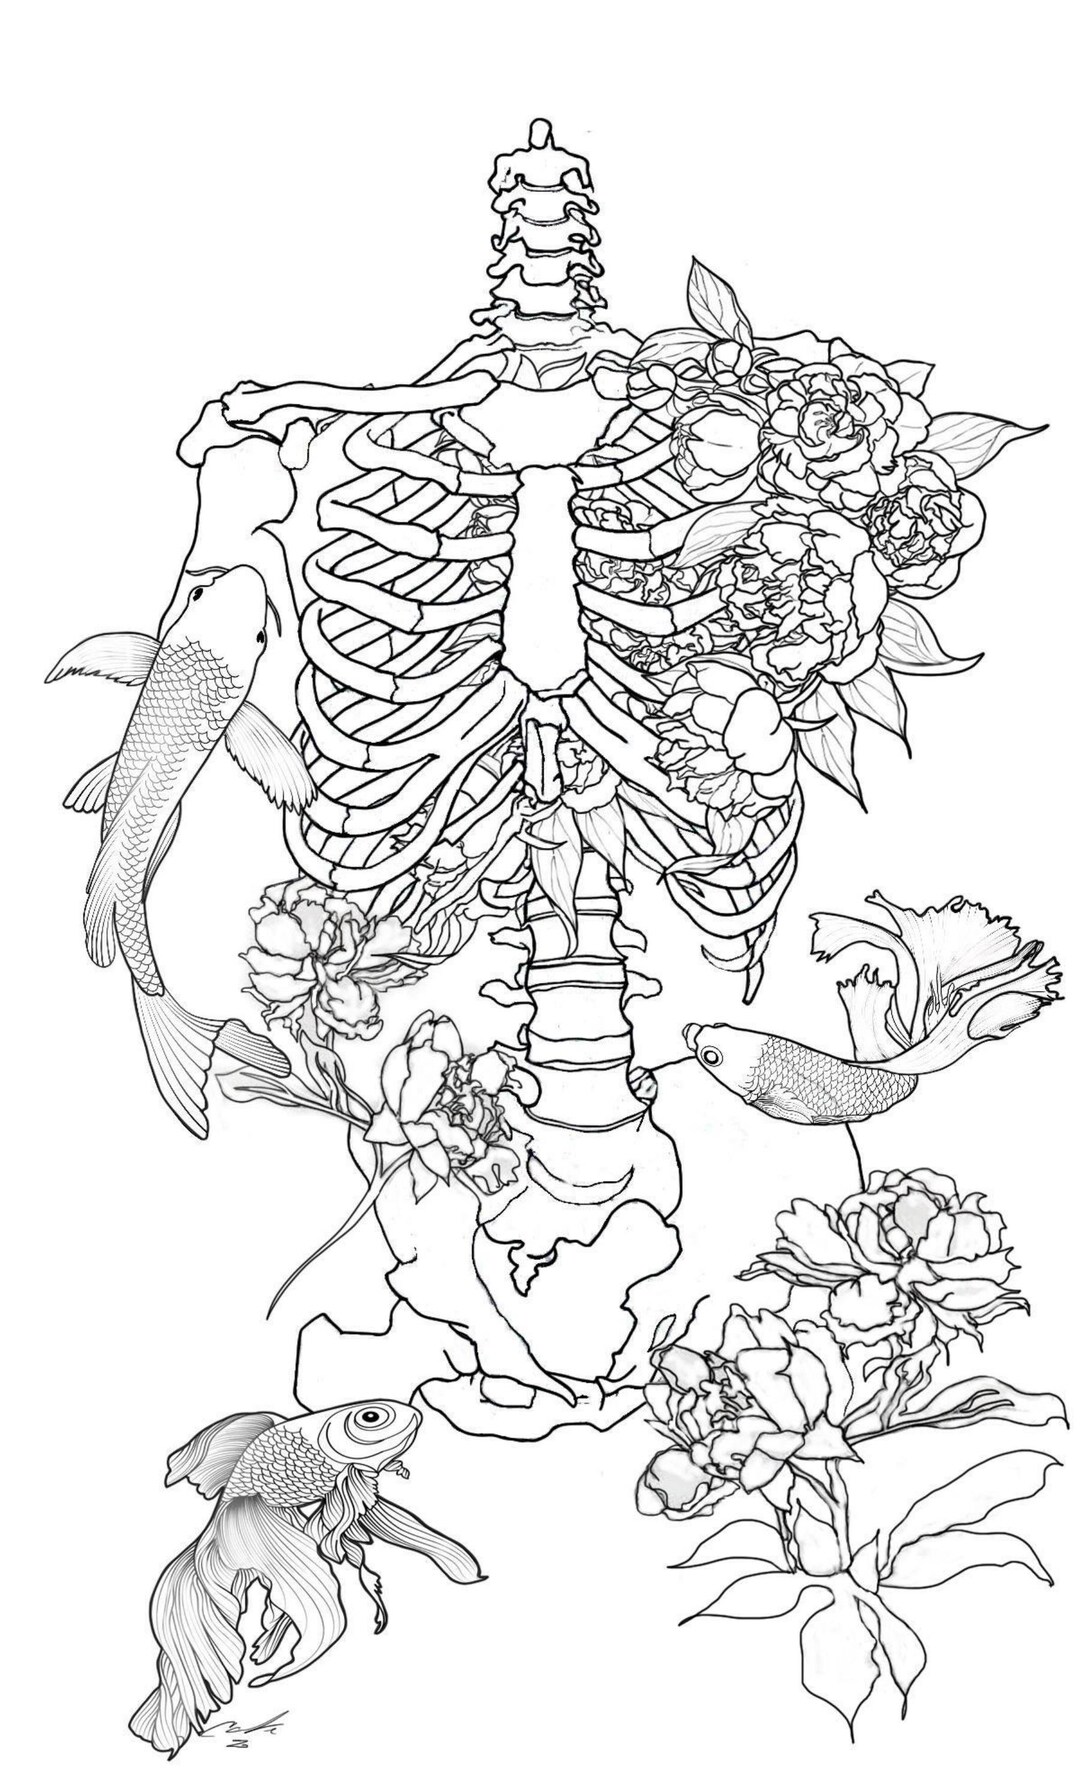 Beautiful bones digital coloring page for download original art all proceeds to charity